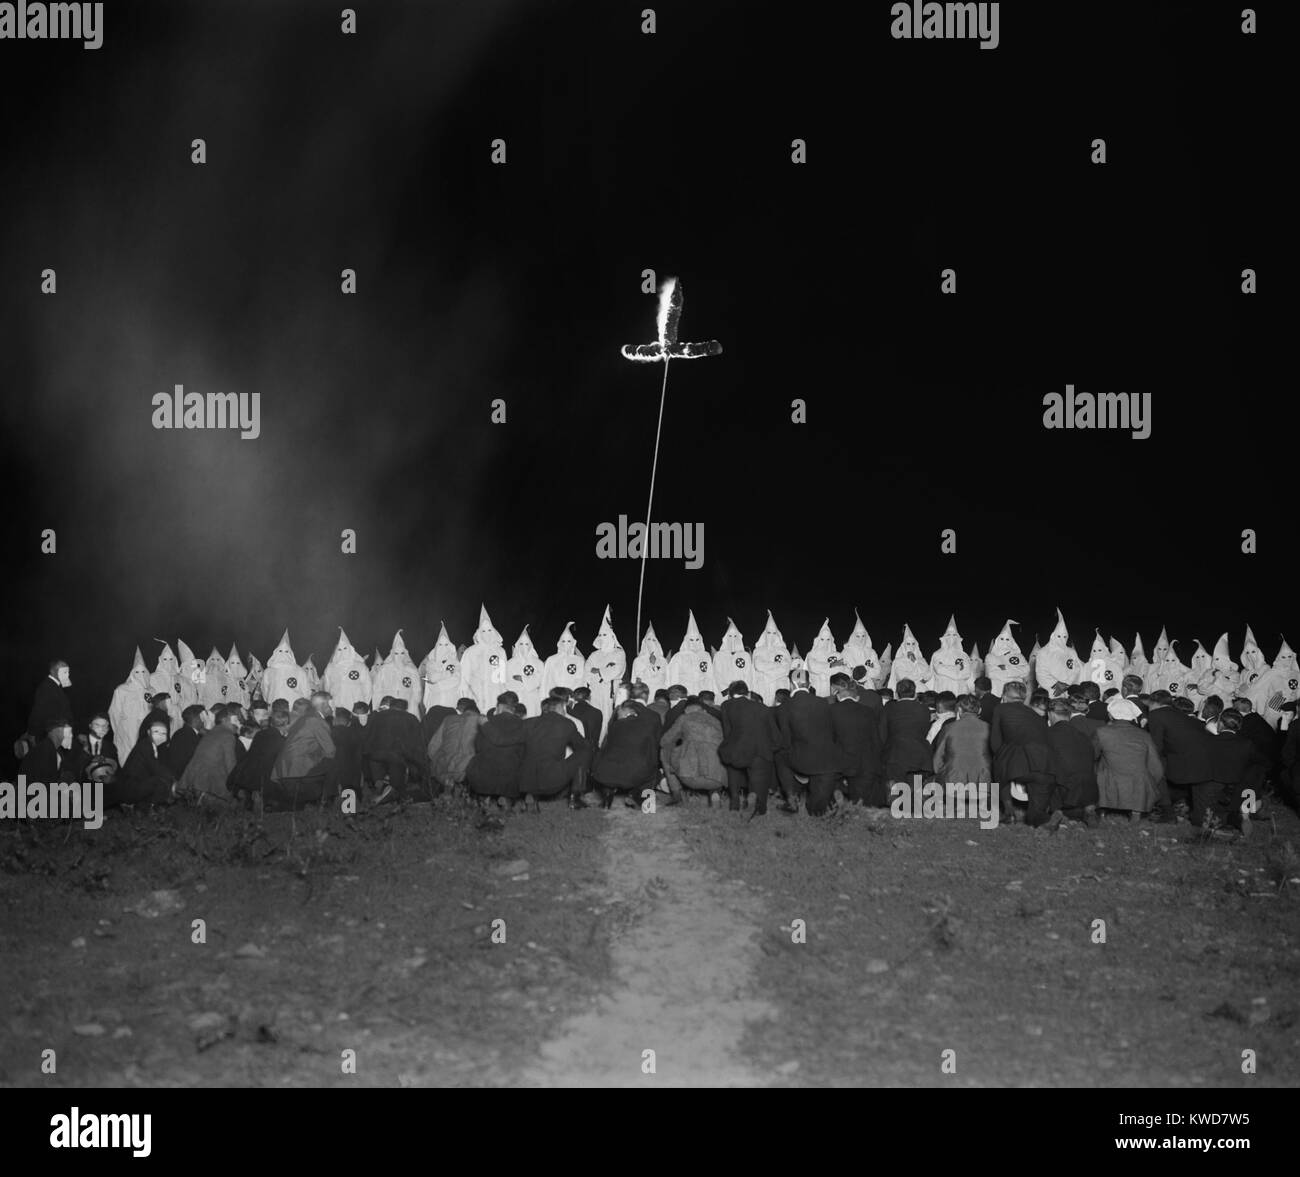 Ku Klux Klan gathering with fully robed and hooded members and kneeling men in face masks. There is a burning cross at what appears to an nocturnal initiation ceremony on June 28, 1922. Photo by National Photo Company and was likely taken within 100 miles of Washington, D.C. (BSLOC 2015 16 173) Stock Photo